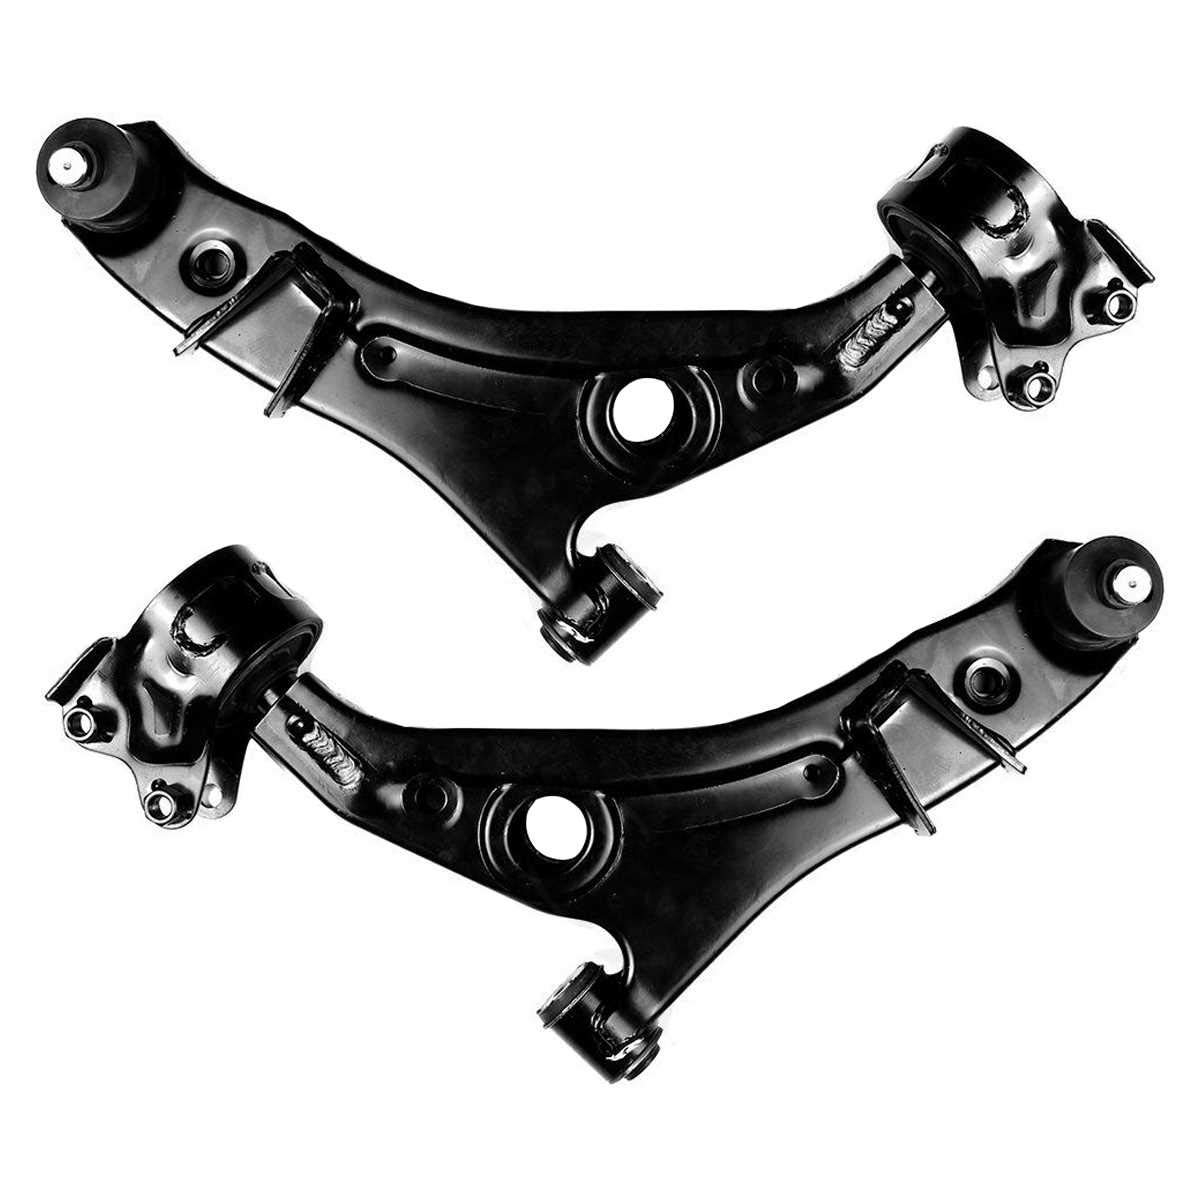 AutoShack Front Lower Control Arms and Ball Joints Assembly with Bushings Pair of 2 Replacement for 2007-2011 2012 2013 2014 Ford Edge 2007-2015 Lincoln MKX 2.0L 3.5L 3.7L V6 AWD FWD CAK1118-1119